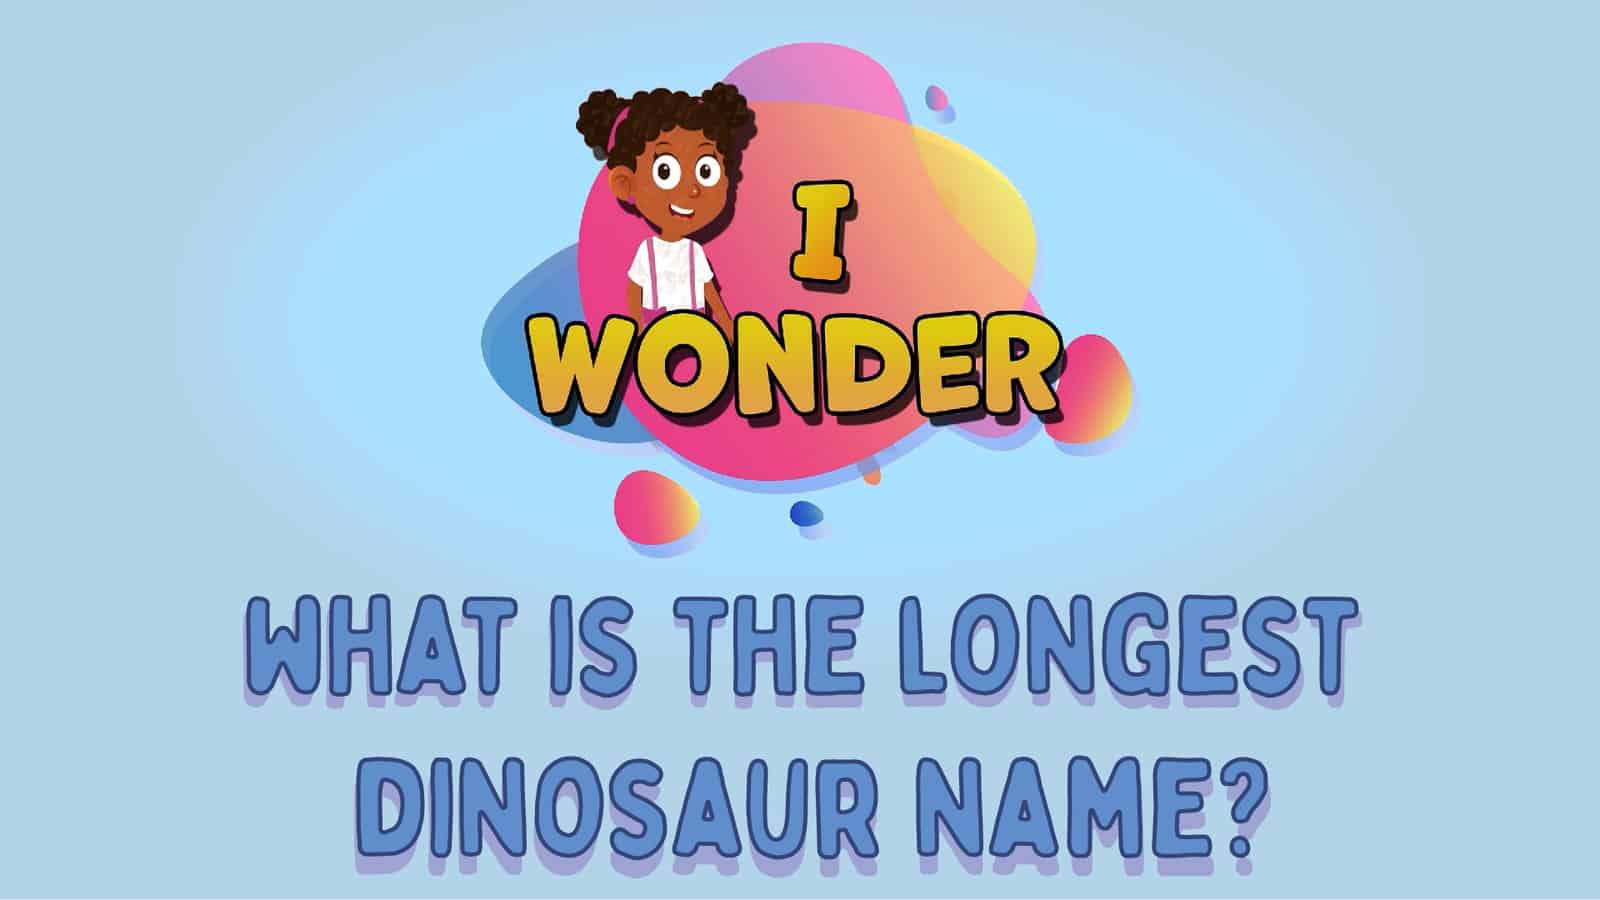 What Is The Longest Dinosaur Name?